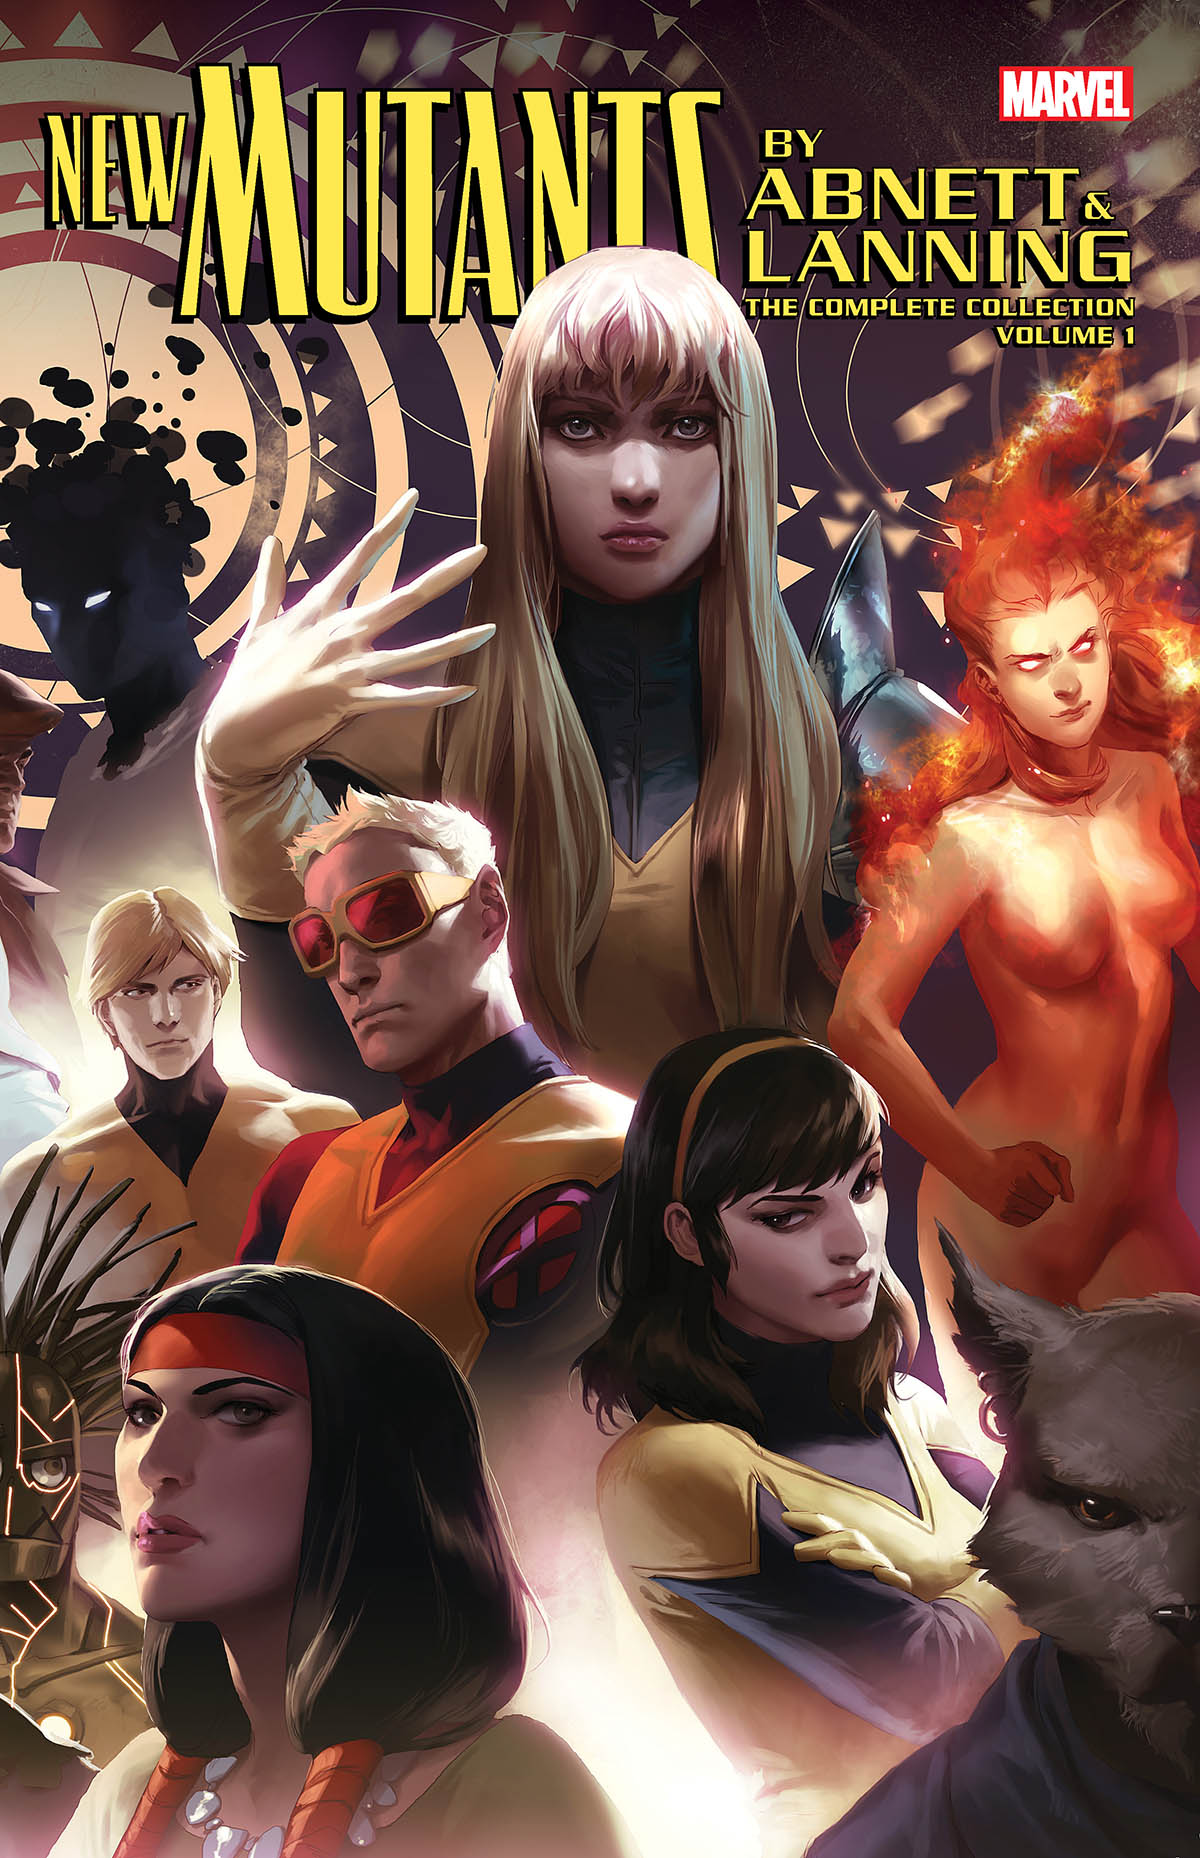 New Mutants by Abnett & Lanning: The Complete Collection Vol. 1 (Trade Paperback)